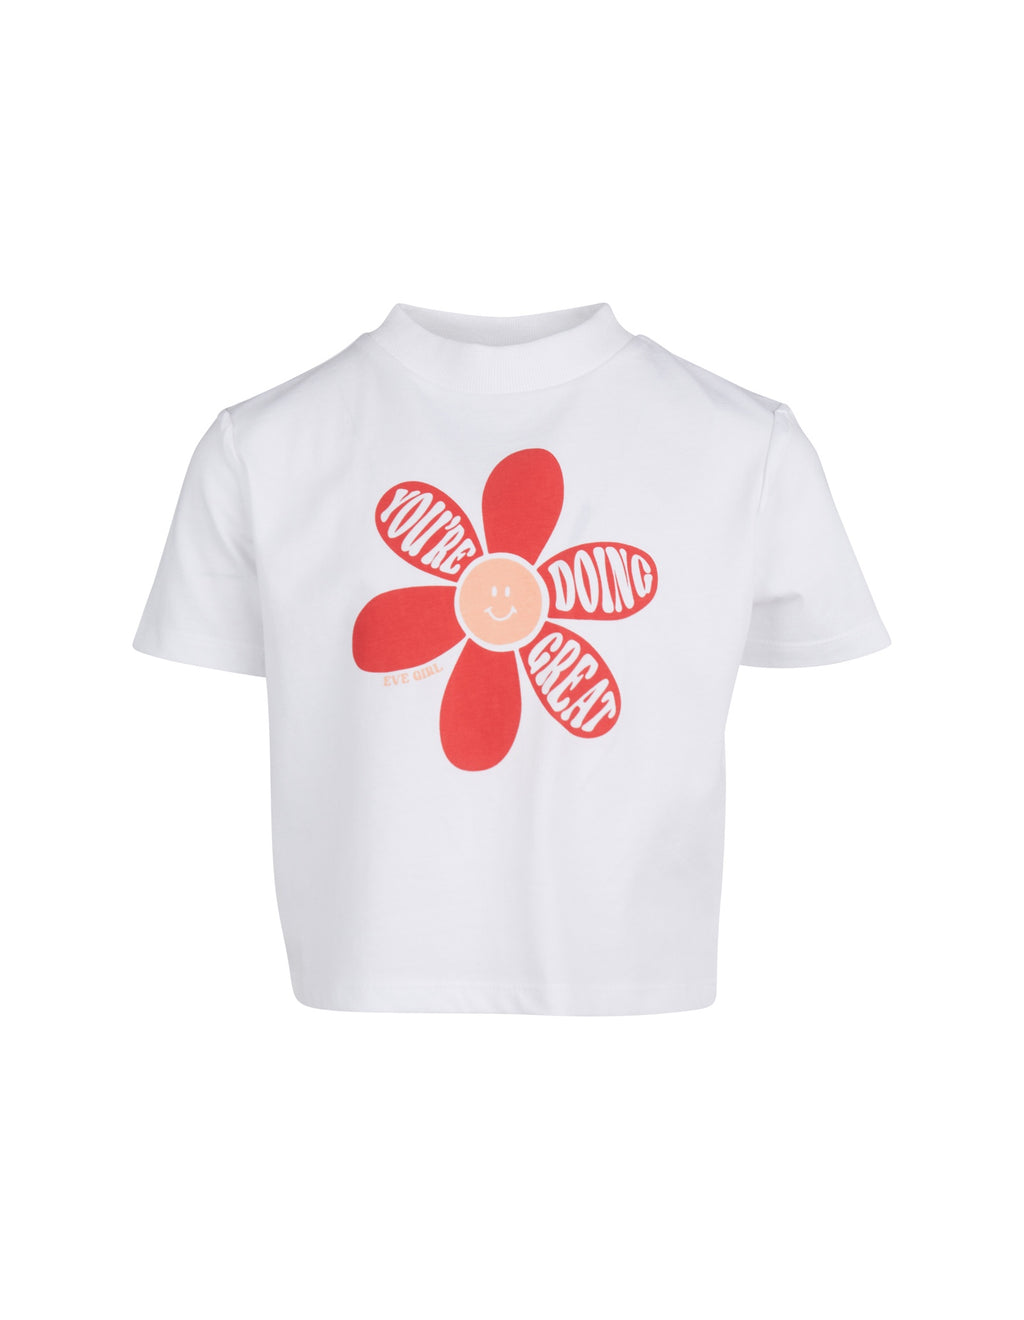 Eve Girl Junior You Are Great Tee - White